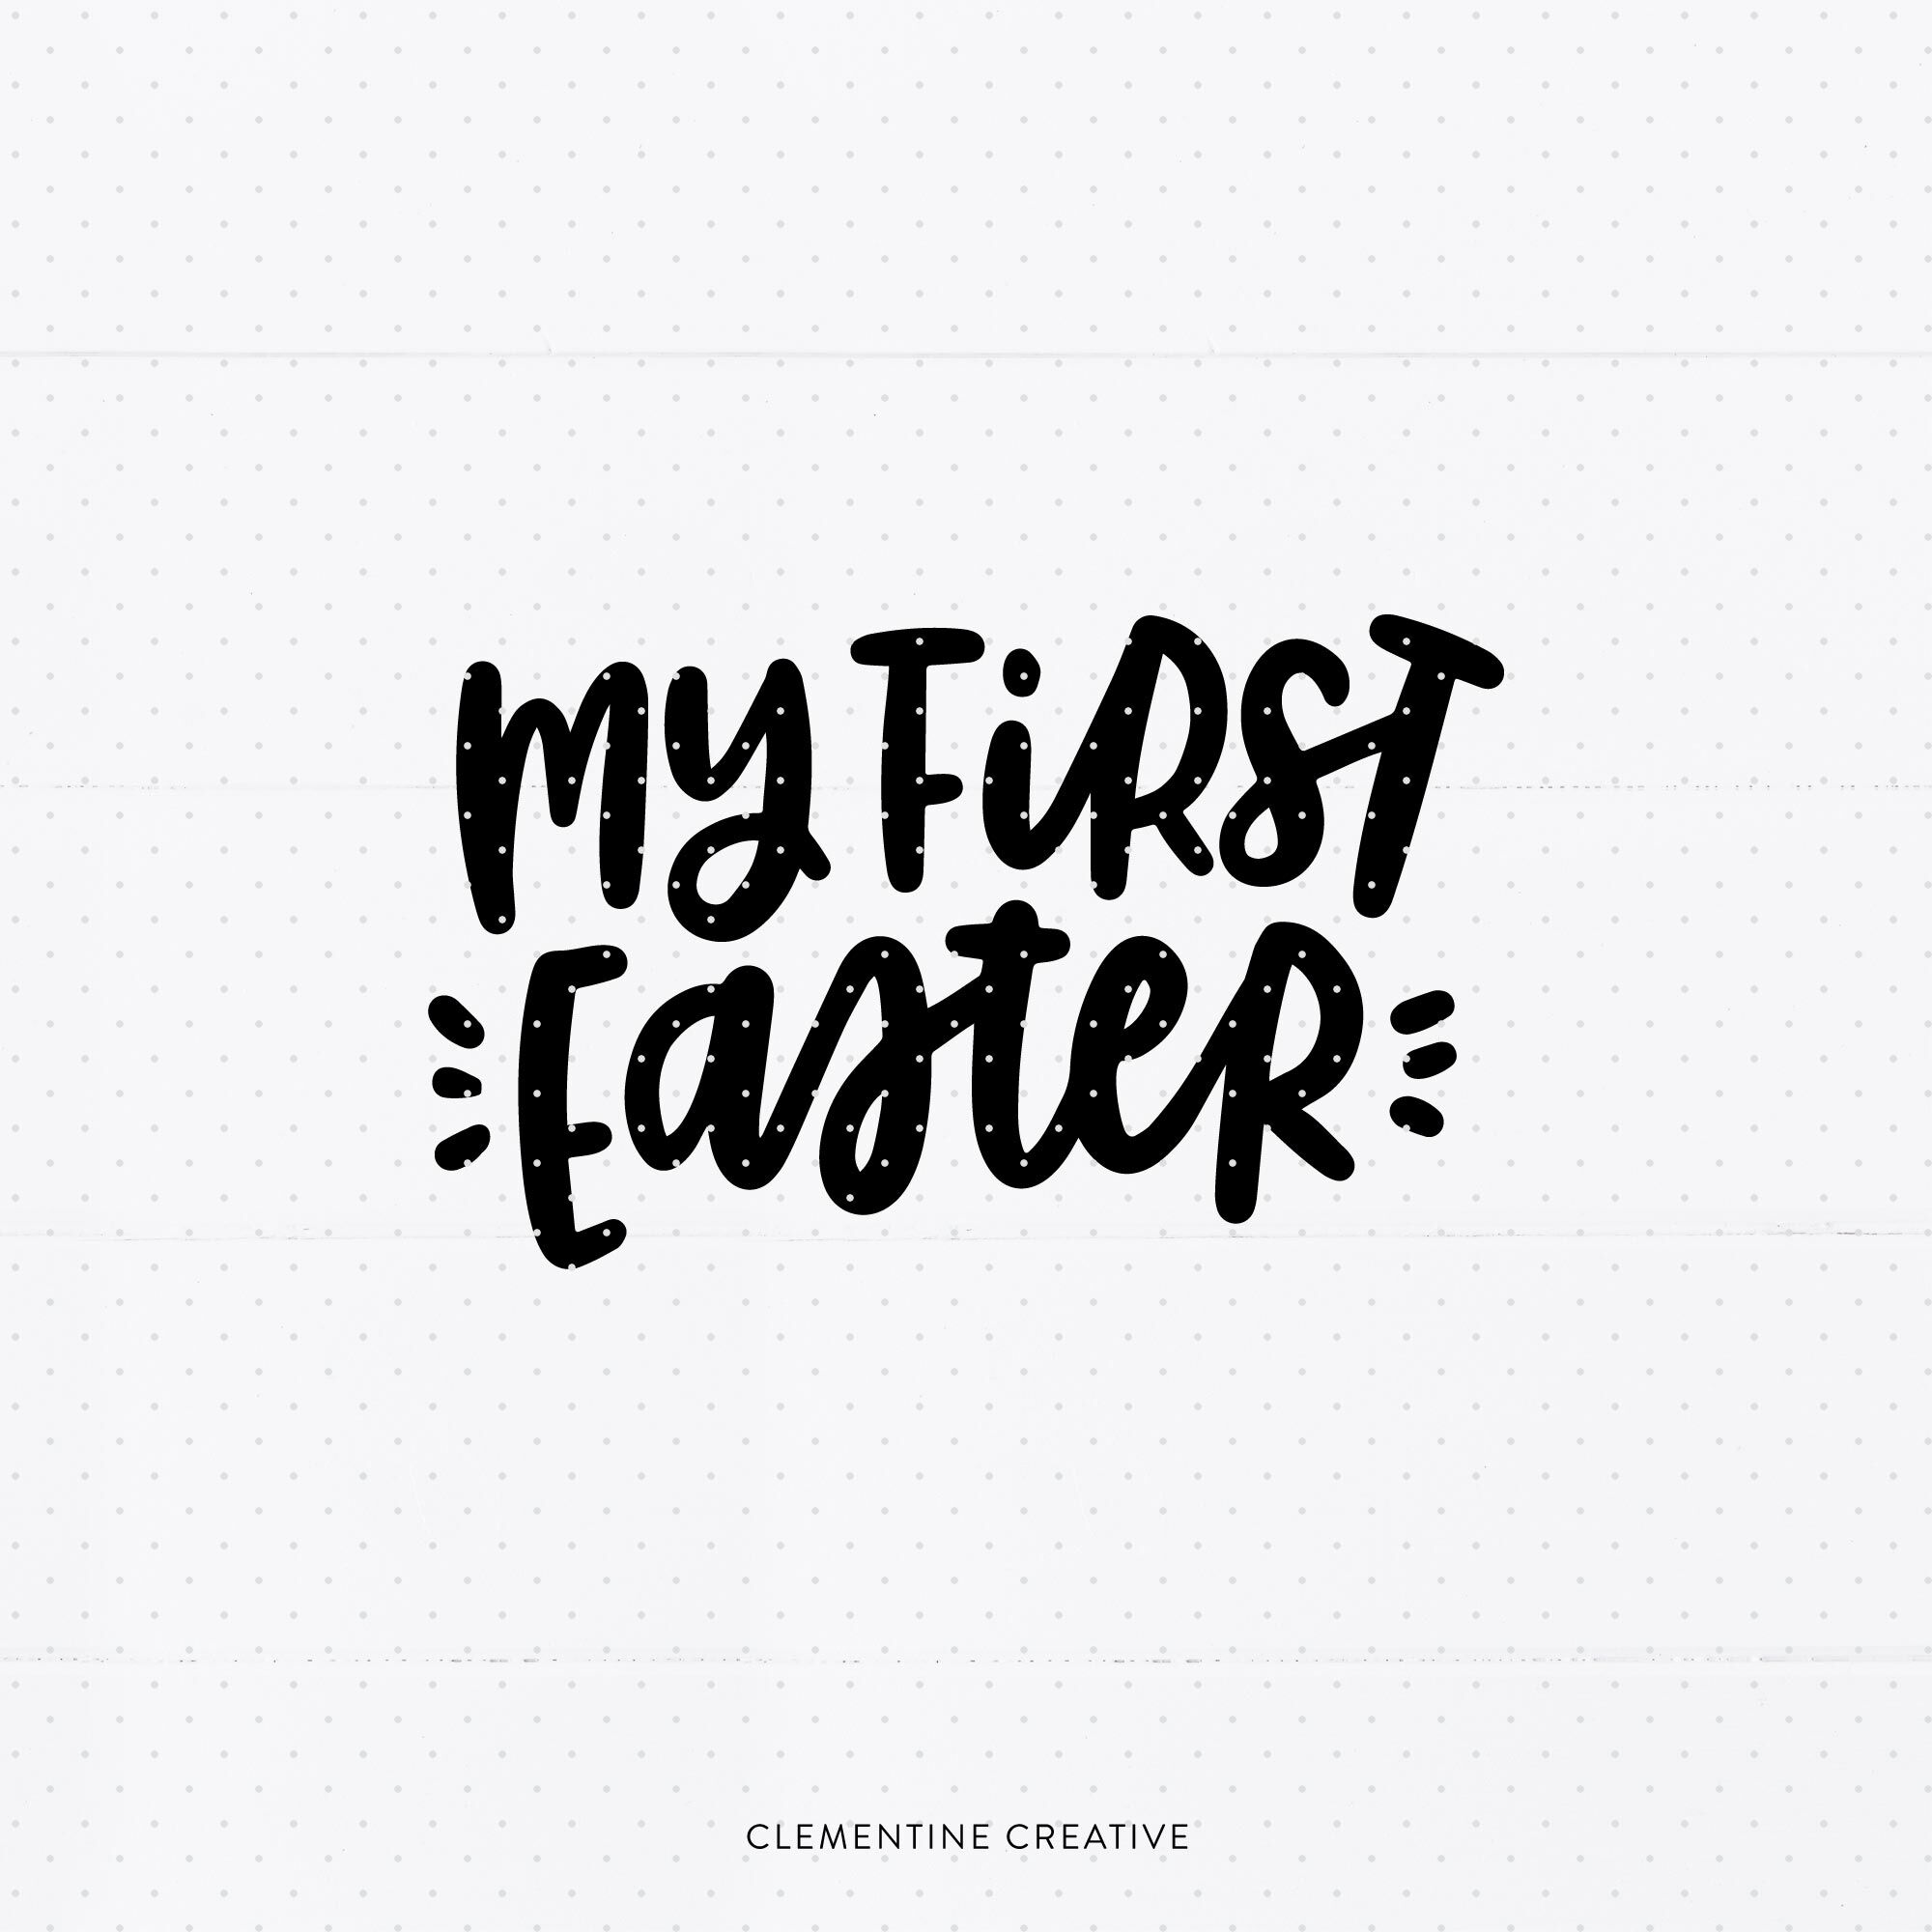 Download My First Easter Svg Baby S 1st Easter Svg By Clementine Creative Thehungryjpeg Com